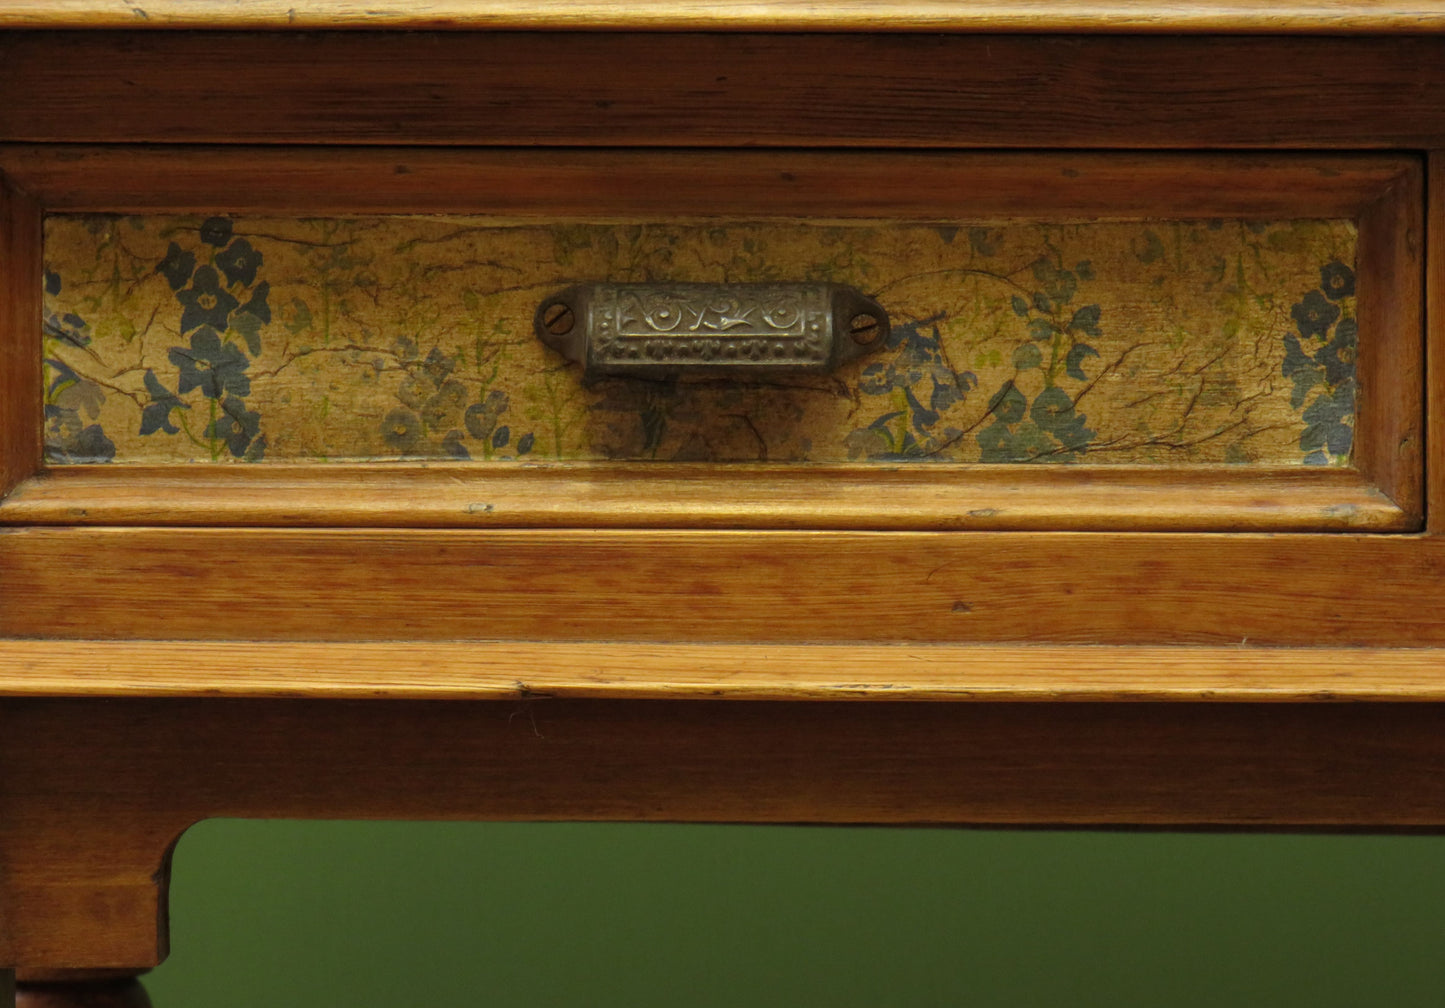 Victorian Pine Washstand with Decoupaged Drawers